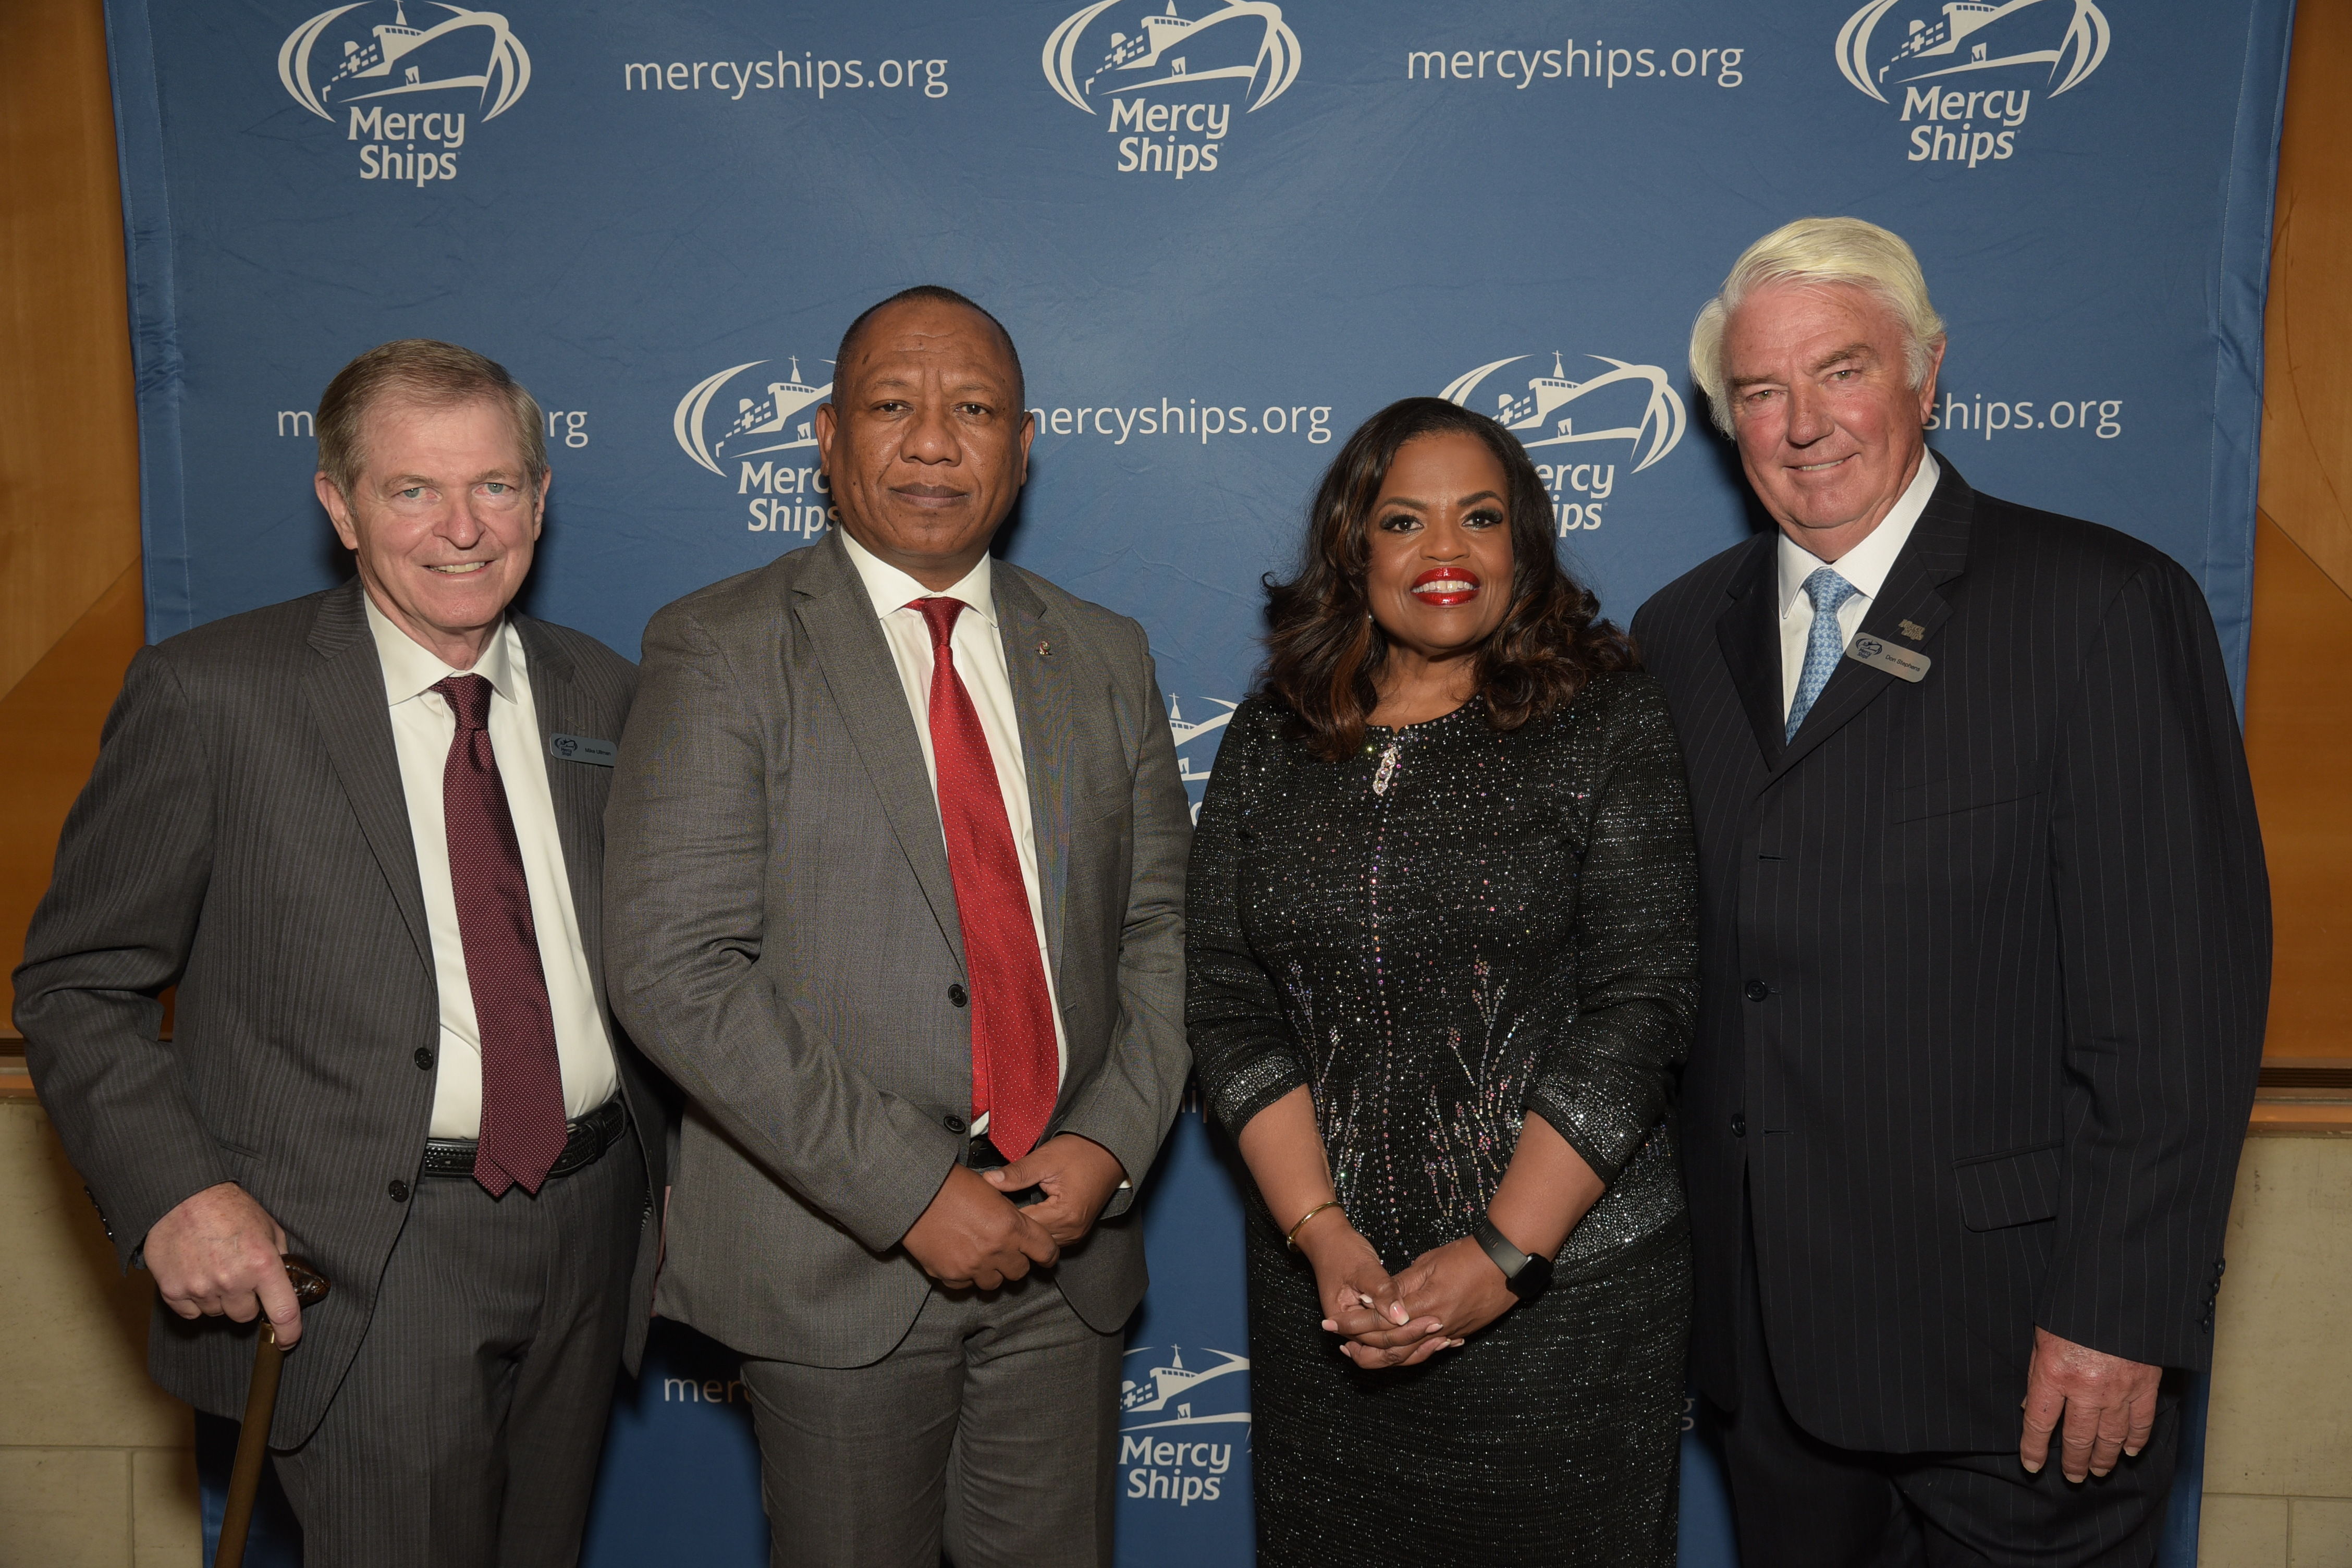 Mike Ullman, chairman of Mercy Ships International; The Right Hon. Christian Louis Ntsay, the prime minister of the Republic of Madagascar; Mercy Ships President Rosa Whitaker; and Don Stephens, Founder of Mercy Ships.